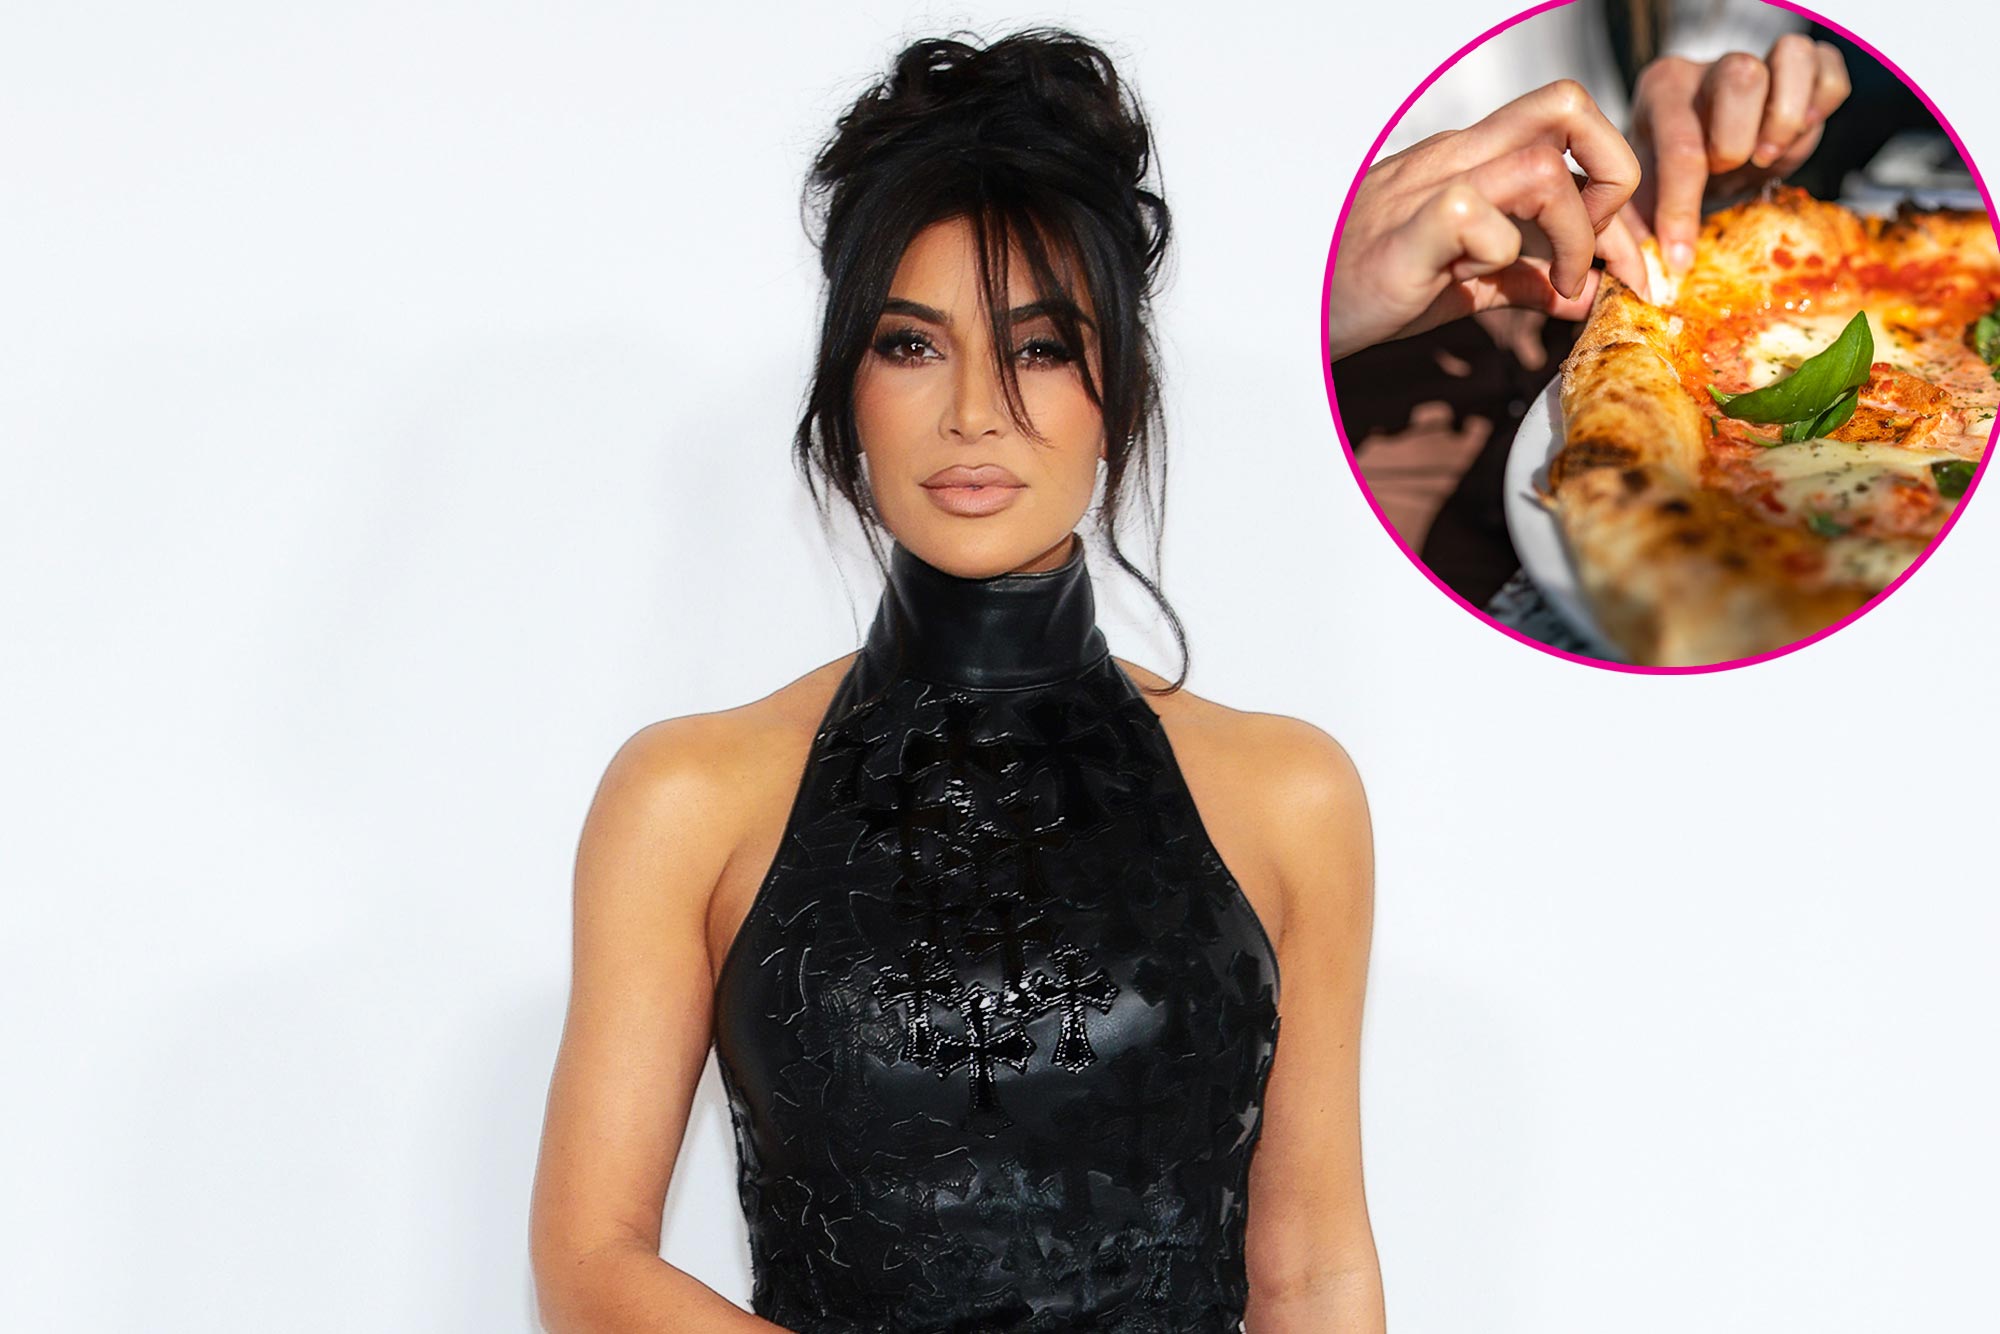 https://www.usmagazine.com/wp-content/uploads/2023/11/Kim-Kardashian-Reveals-She-Doesn-t-Like-the-Cheese-on-Pizza-Just-the-Bread-077.jpg?quality=86&strip=all